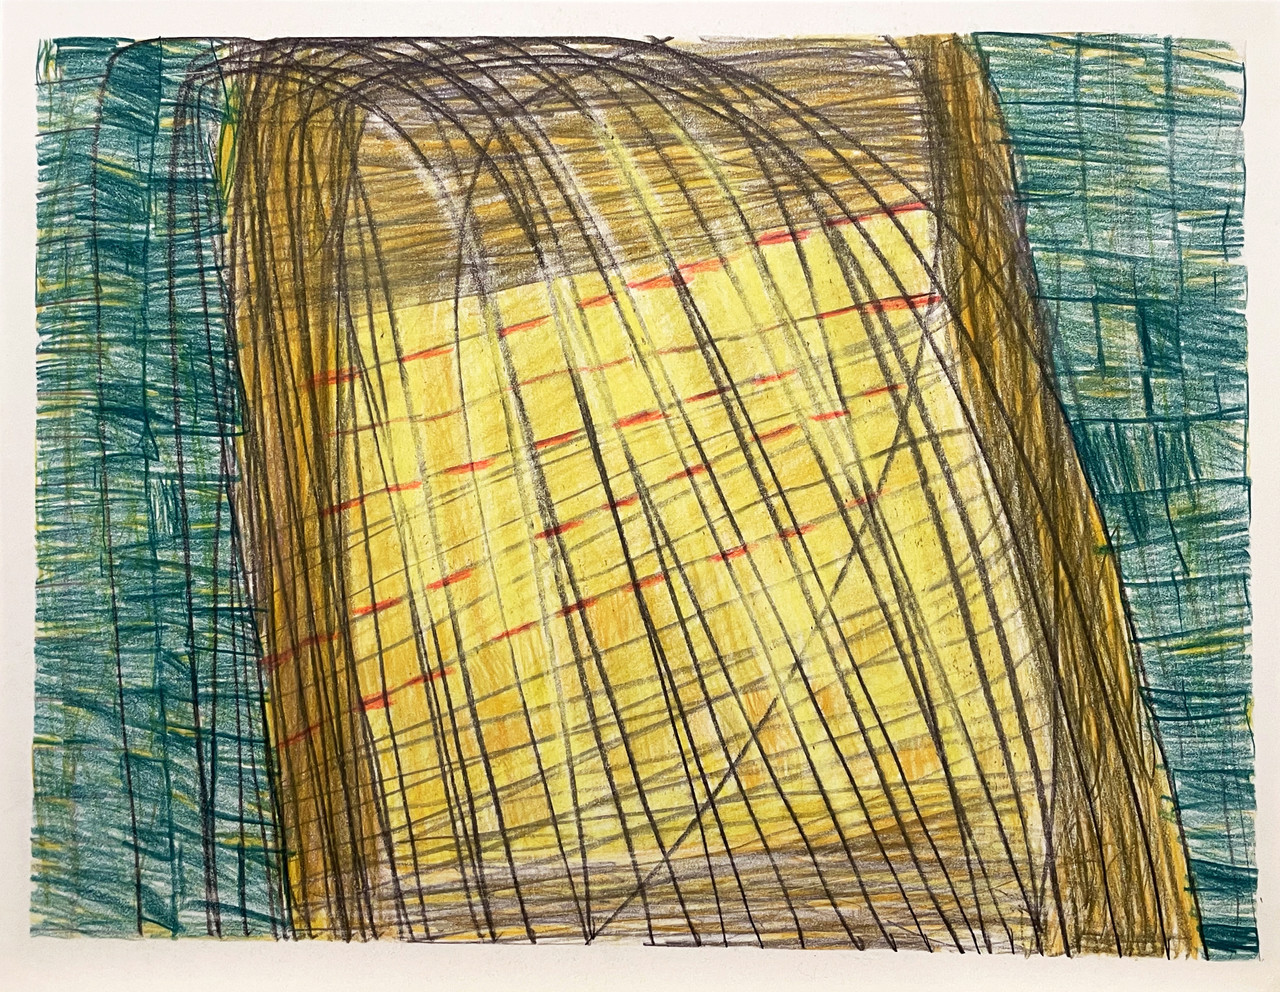 Untitled, 1988, Colored pencil and graphite on paper, 38.7 x 47 cm, BS 007